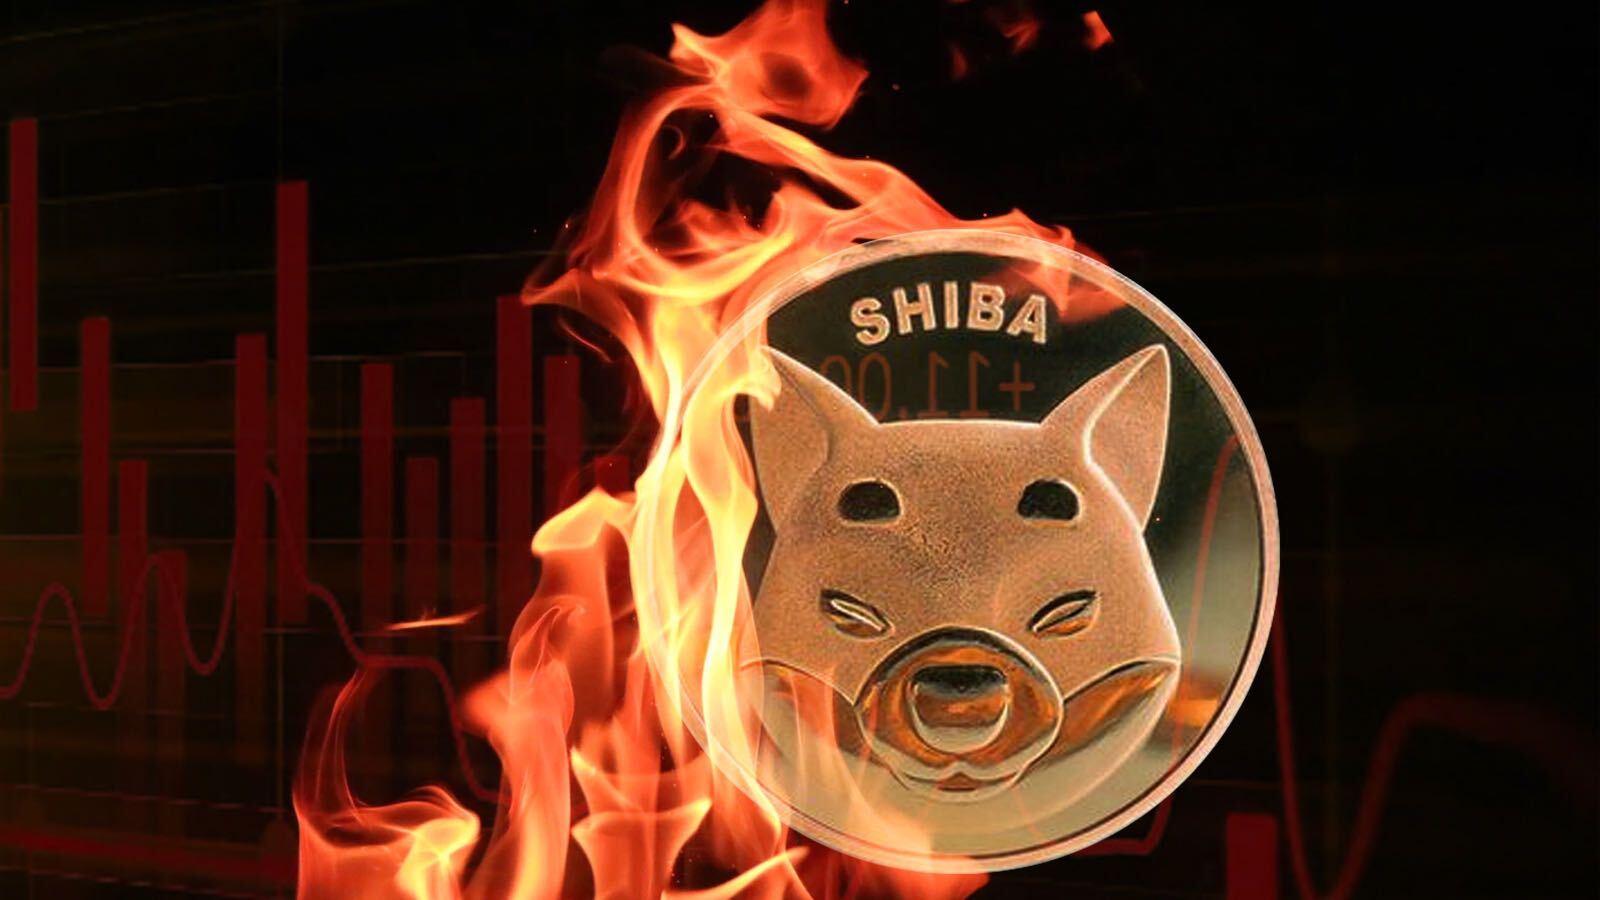 Shiba Inu Burning Amount Declines In September with 272 Million SHIB Burned Past Week